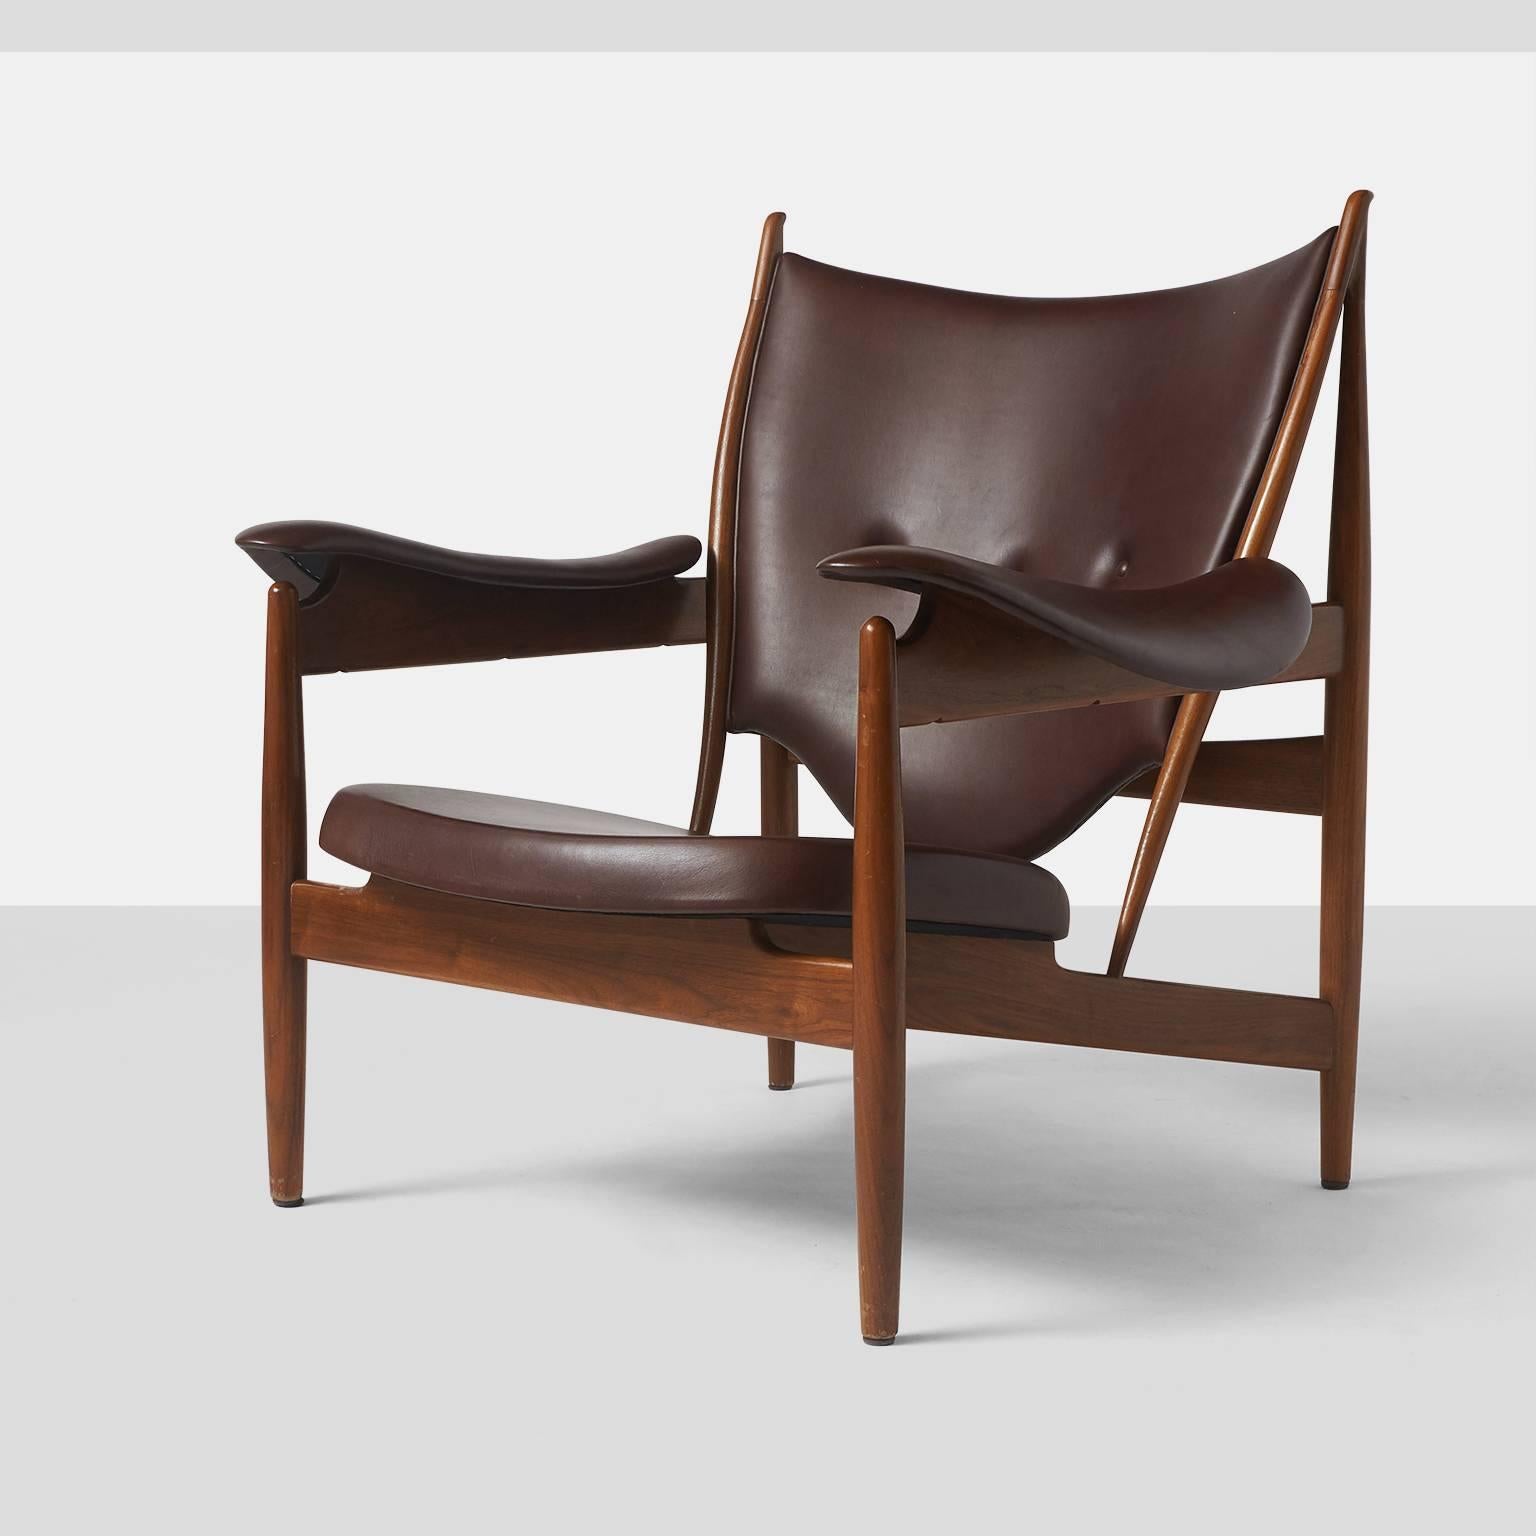 A chieftain chair by Finn Juhl designed in 1951 and manufactured by Baker Furniture in the late 20th century. The chair is upholstered in a deep chocolate color leather on teak frame. The chieftain chair is no longer in production.